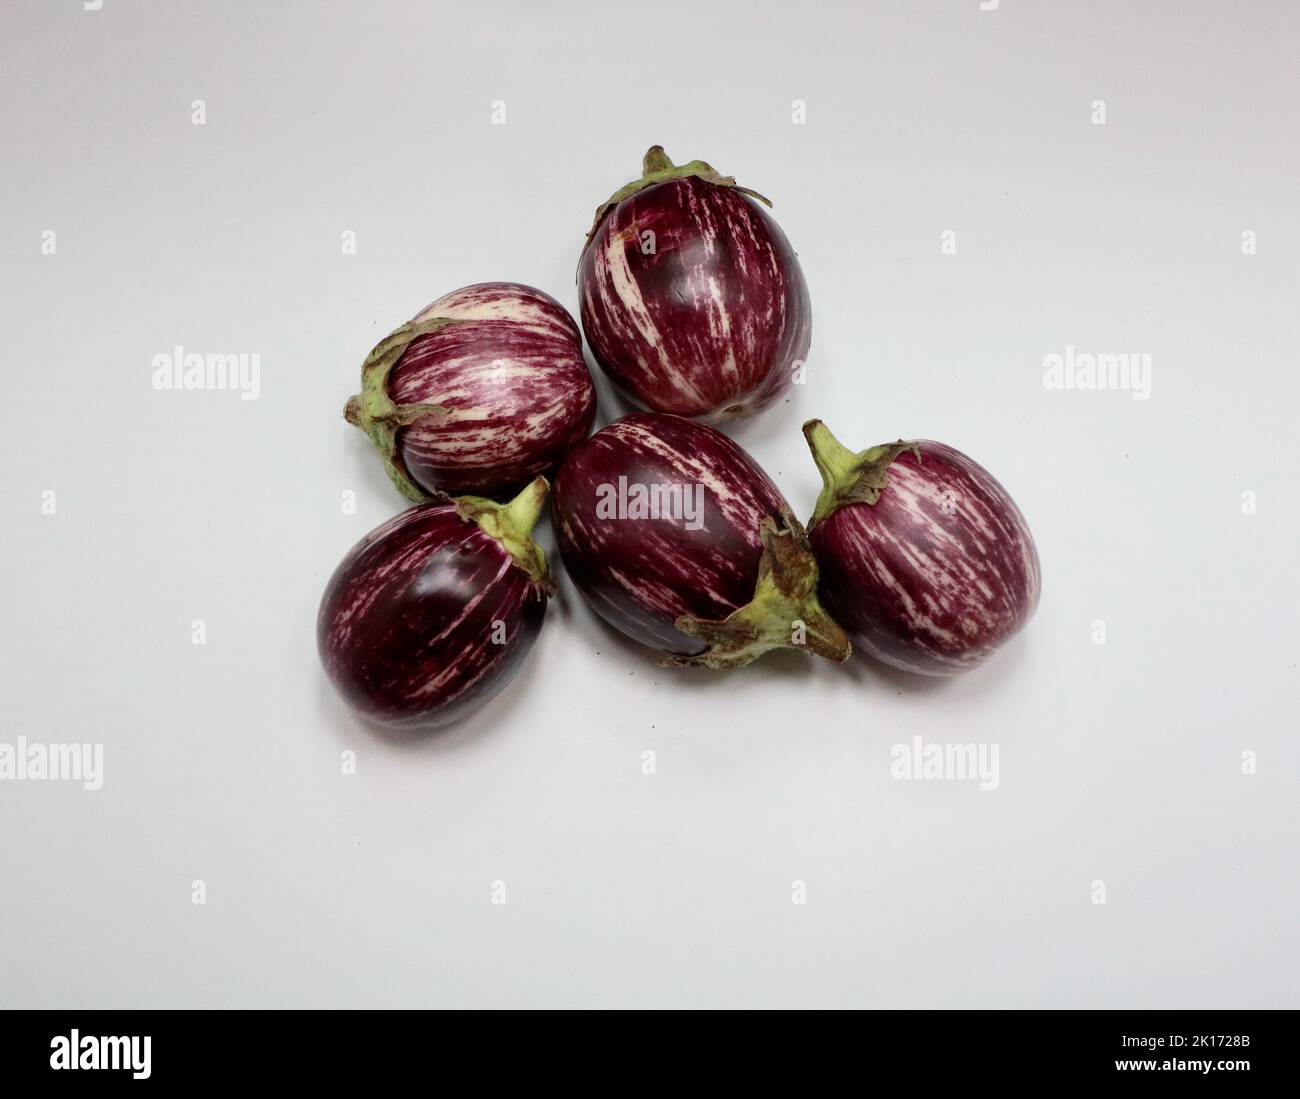 Purple and white striped aubergines on white background with copy space Stock Photo